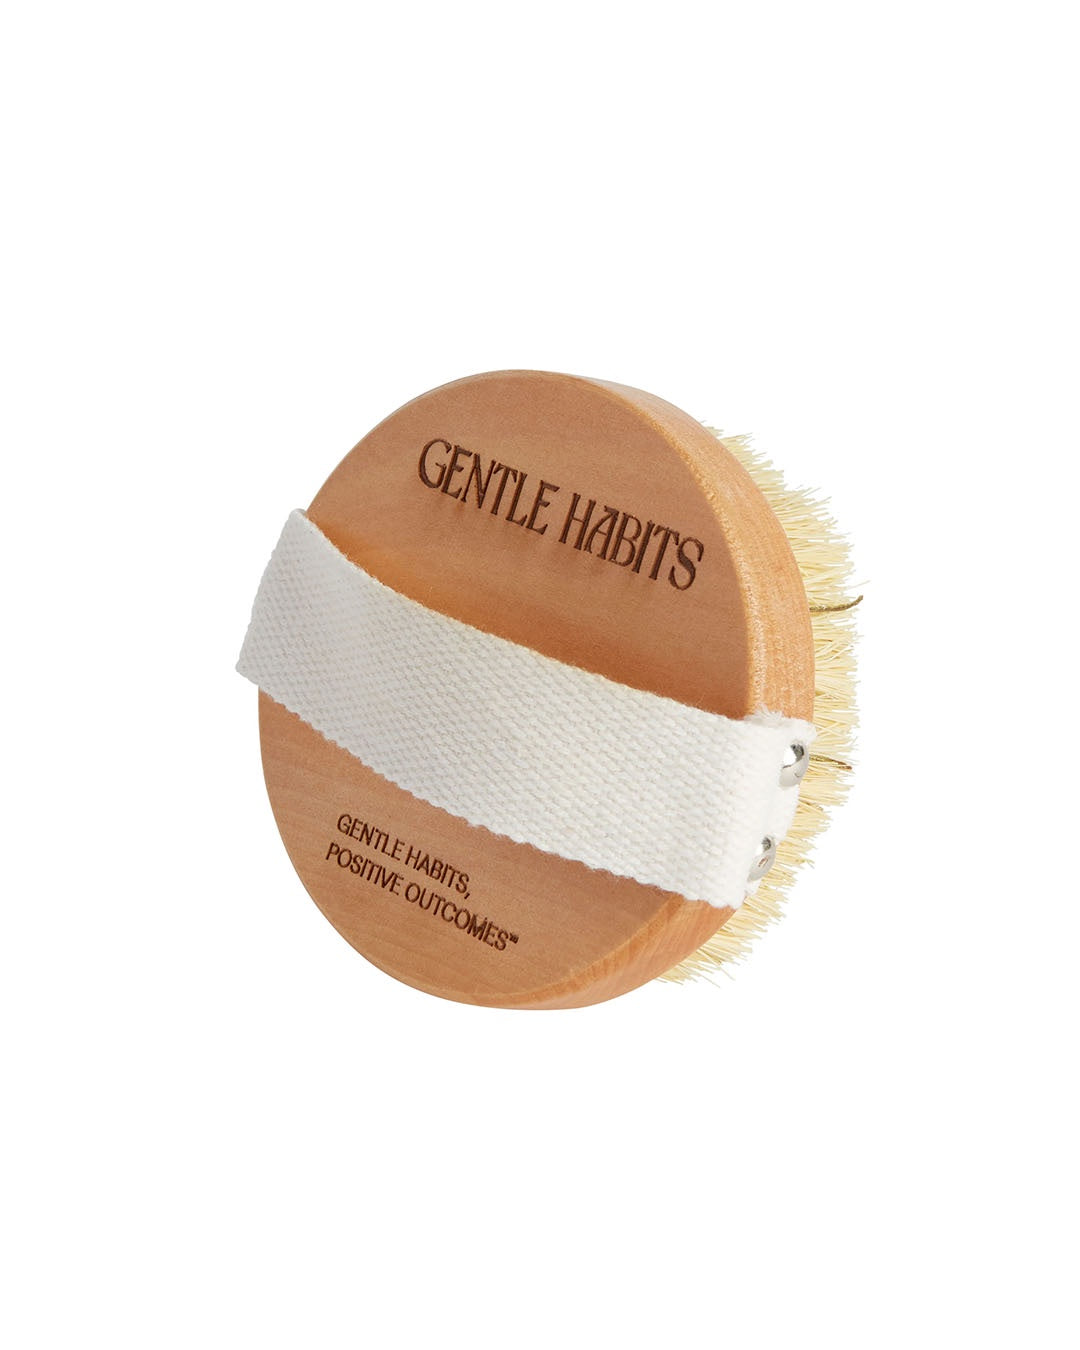 The Body Brush - SALTY Beauty Tools by Gentle Habits - Prae Store